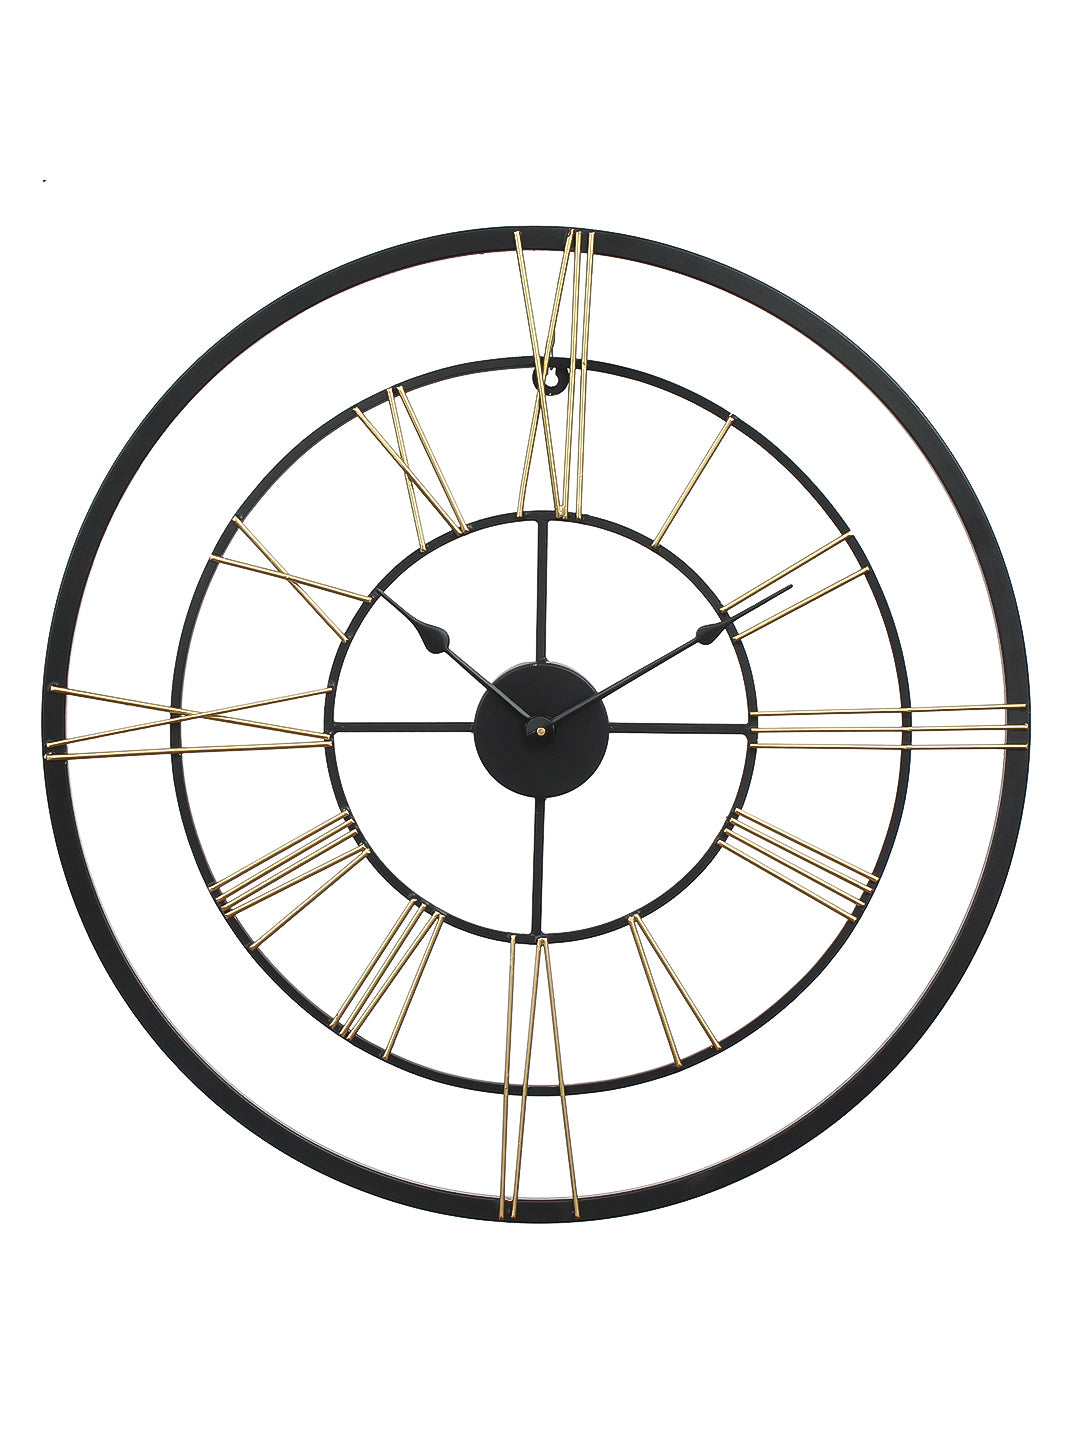 Black Iron Base with Double Golden Roman Figures Round Hand-Crafted Analog Wall Clock Without Glass ( 64Cm x 64Cm )